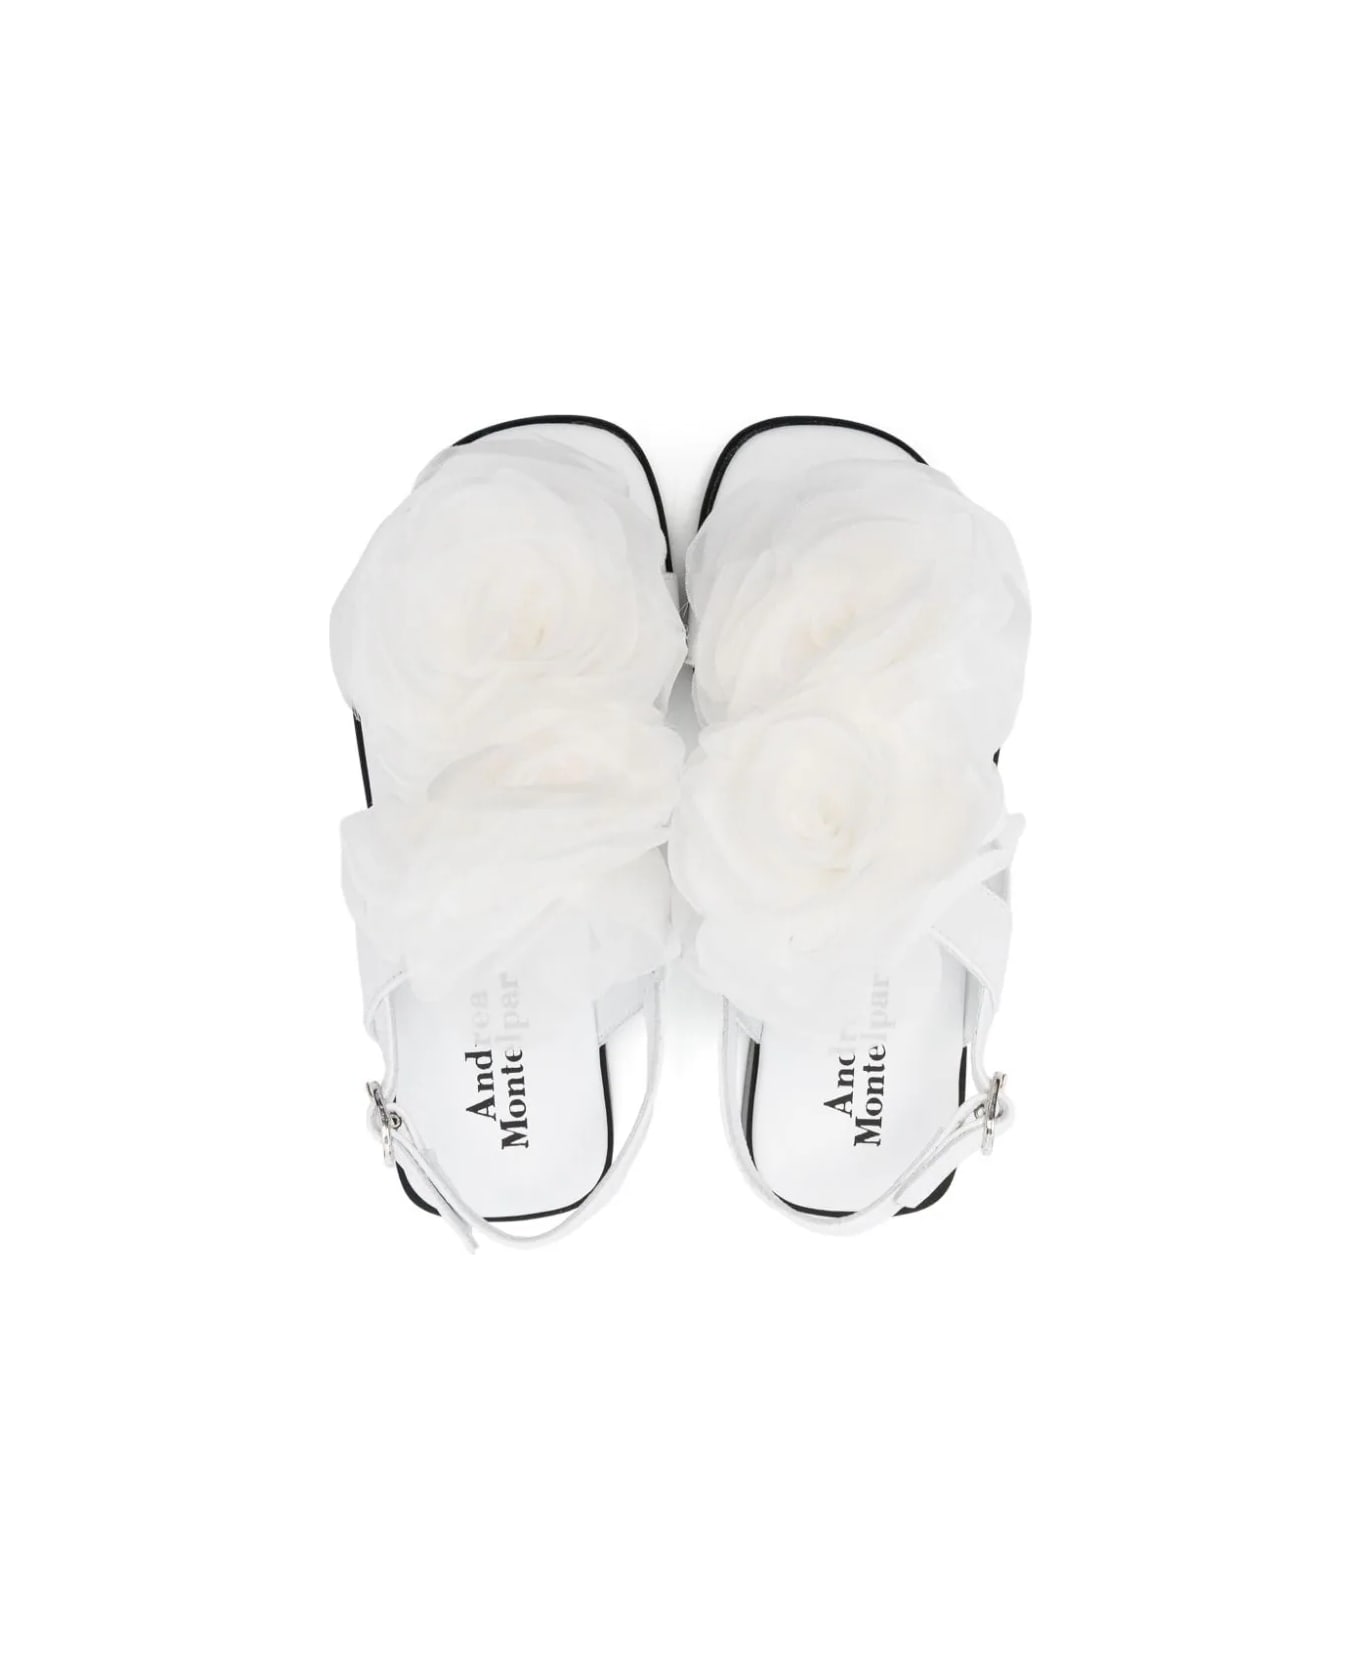 Andrea Montelpare Sandal With Applications - White シューズ